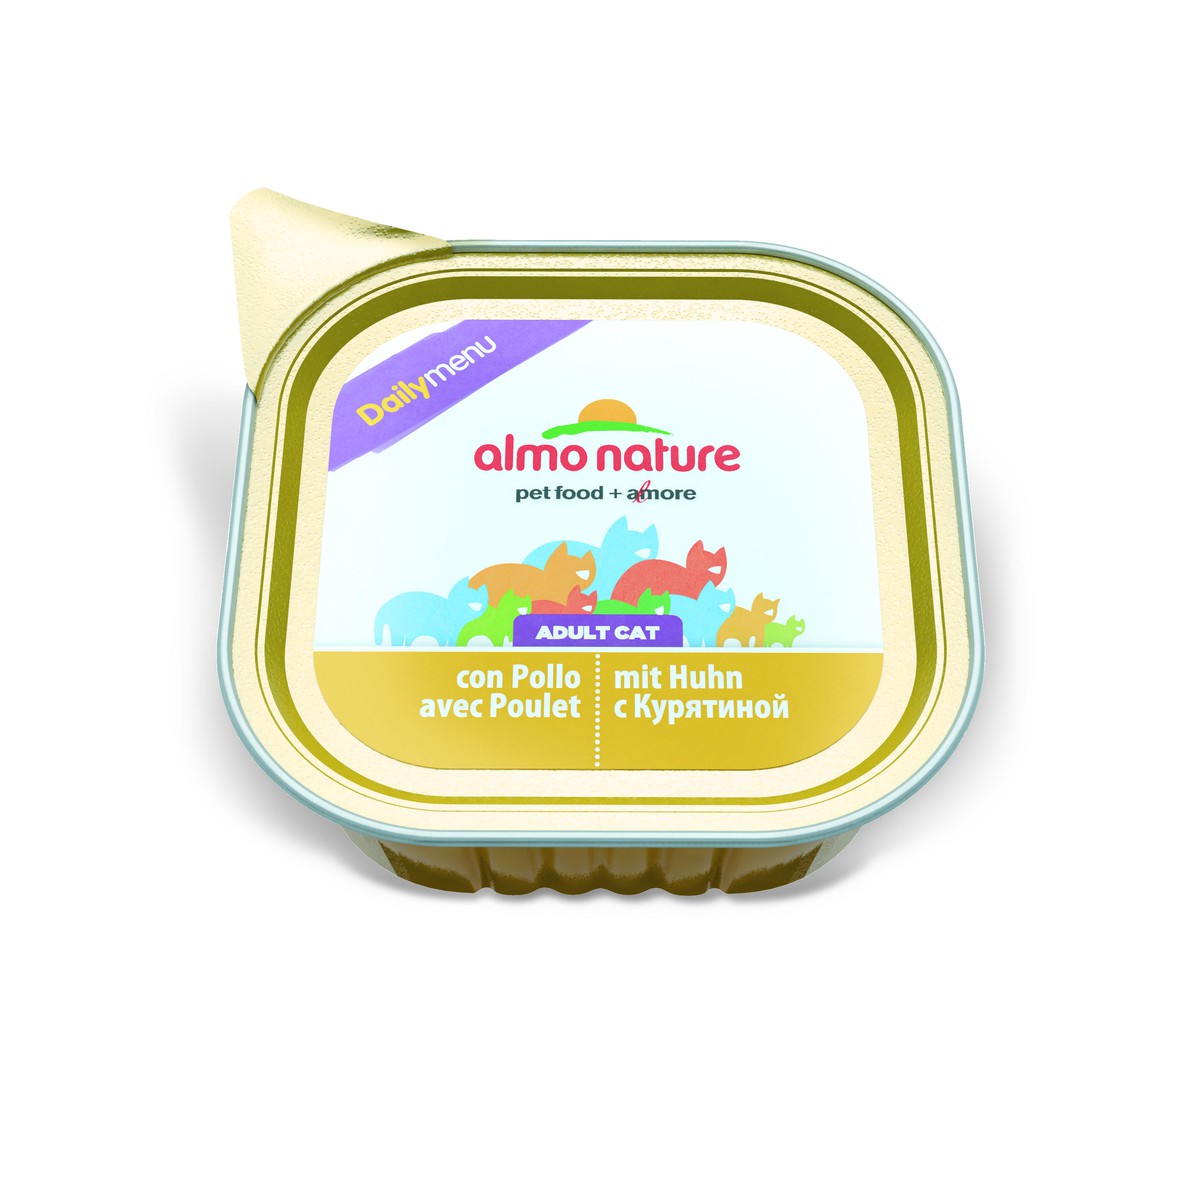 Almo nature  Almo nature PFC Cat Daily menu Poulet 100g  100 g